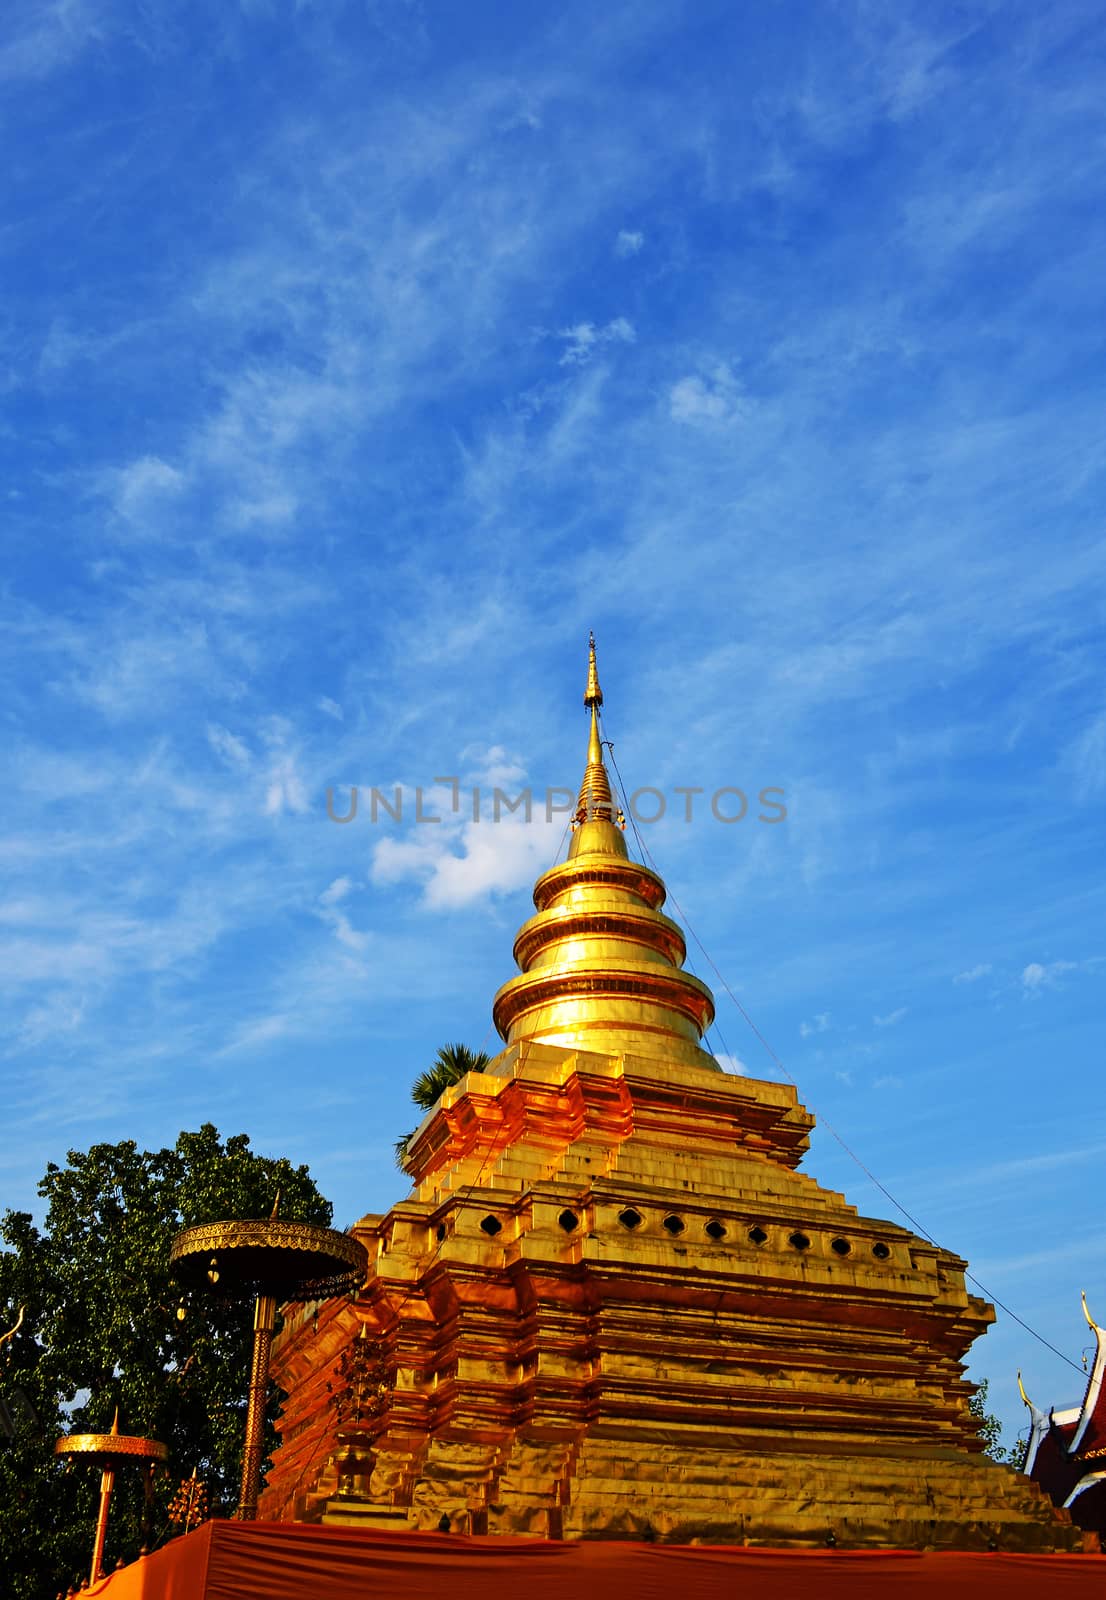 Phra That Sri Jom Thong Series 1_6, Golden Pagoda with Cloud and Blue Sky.Chiang Mai province,Thailand.